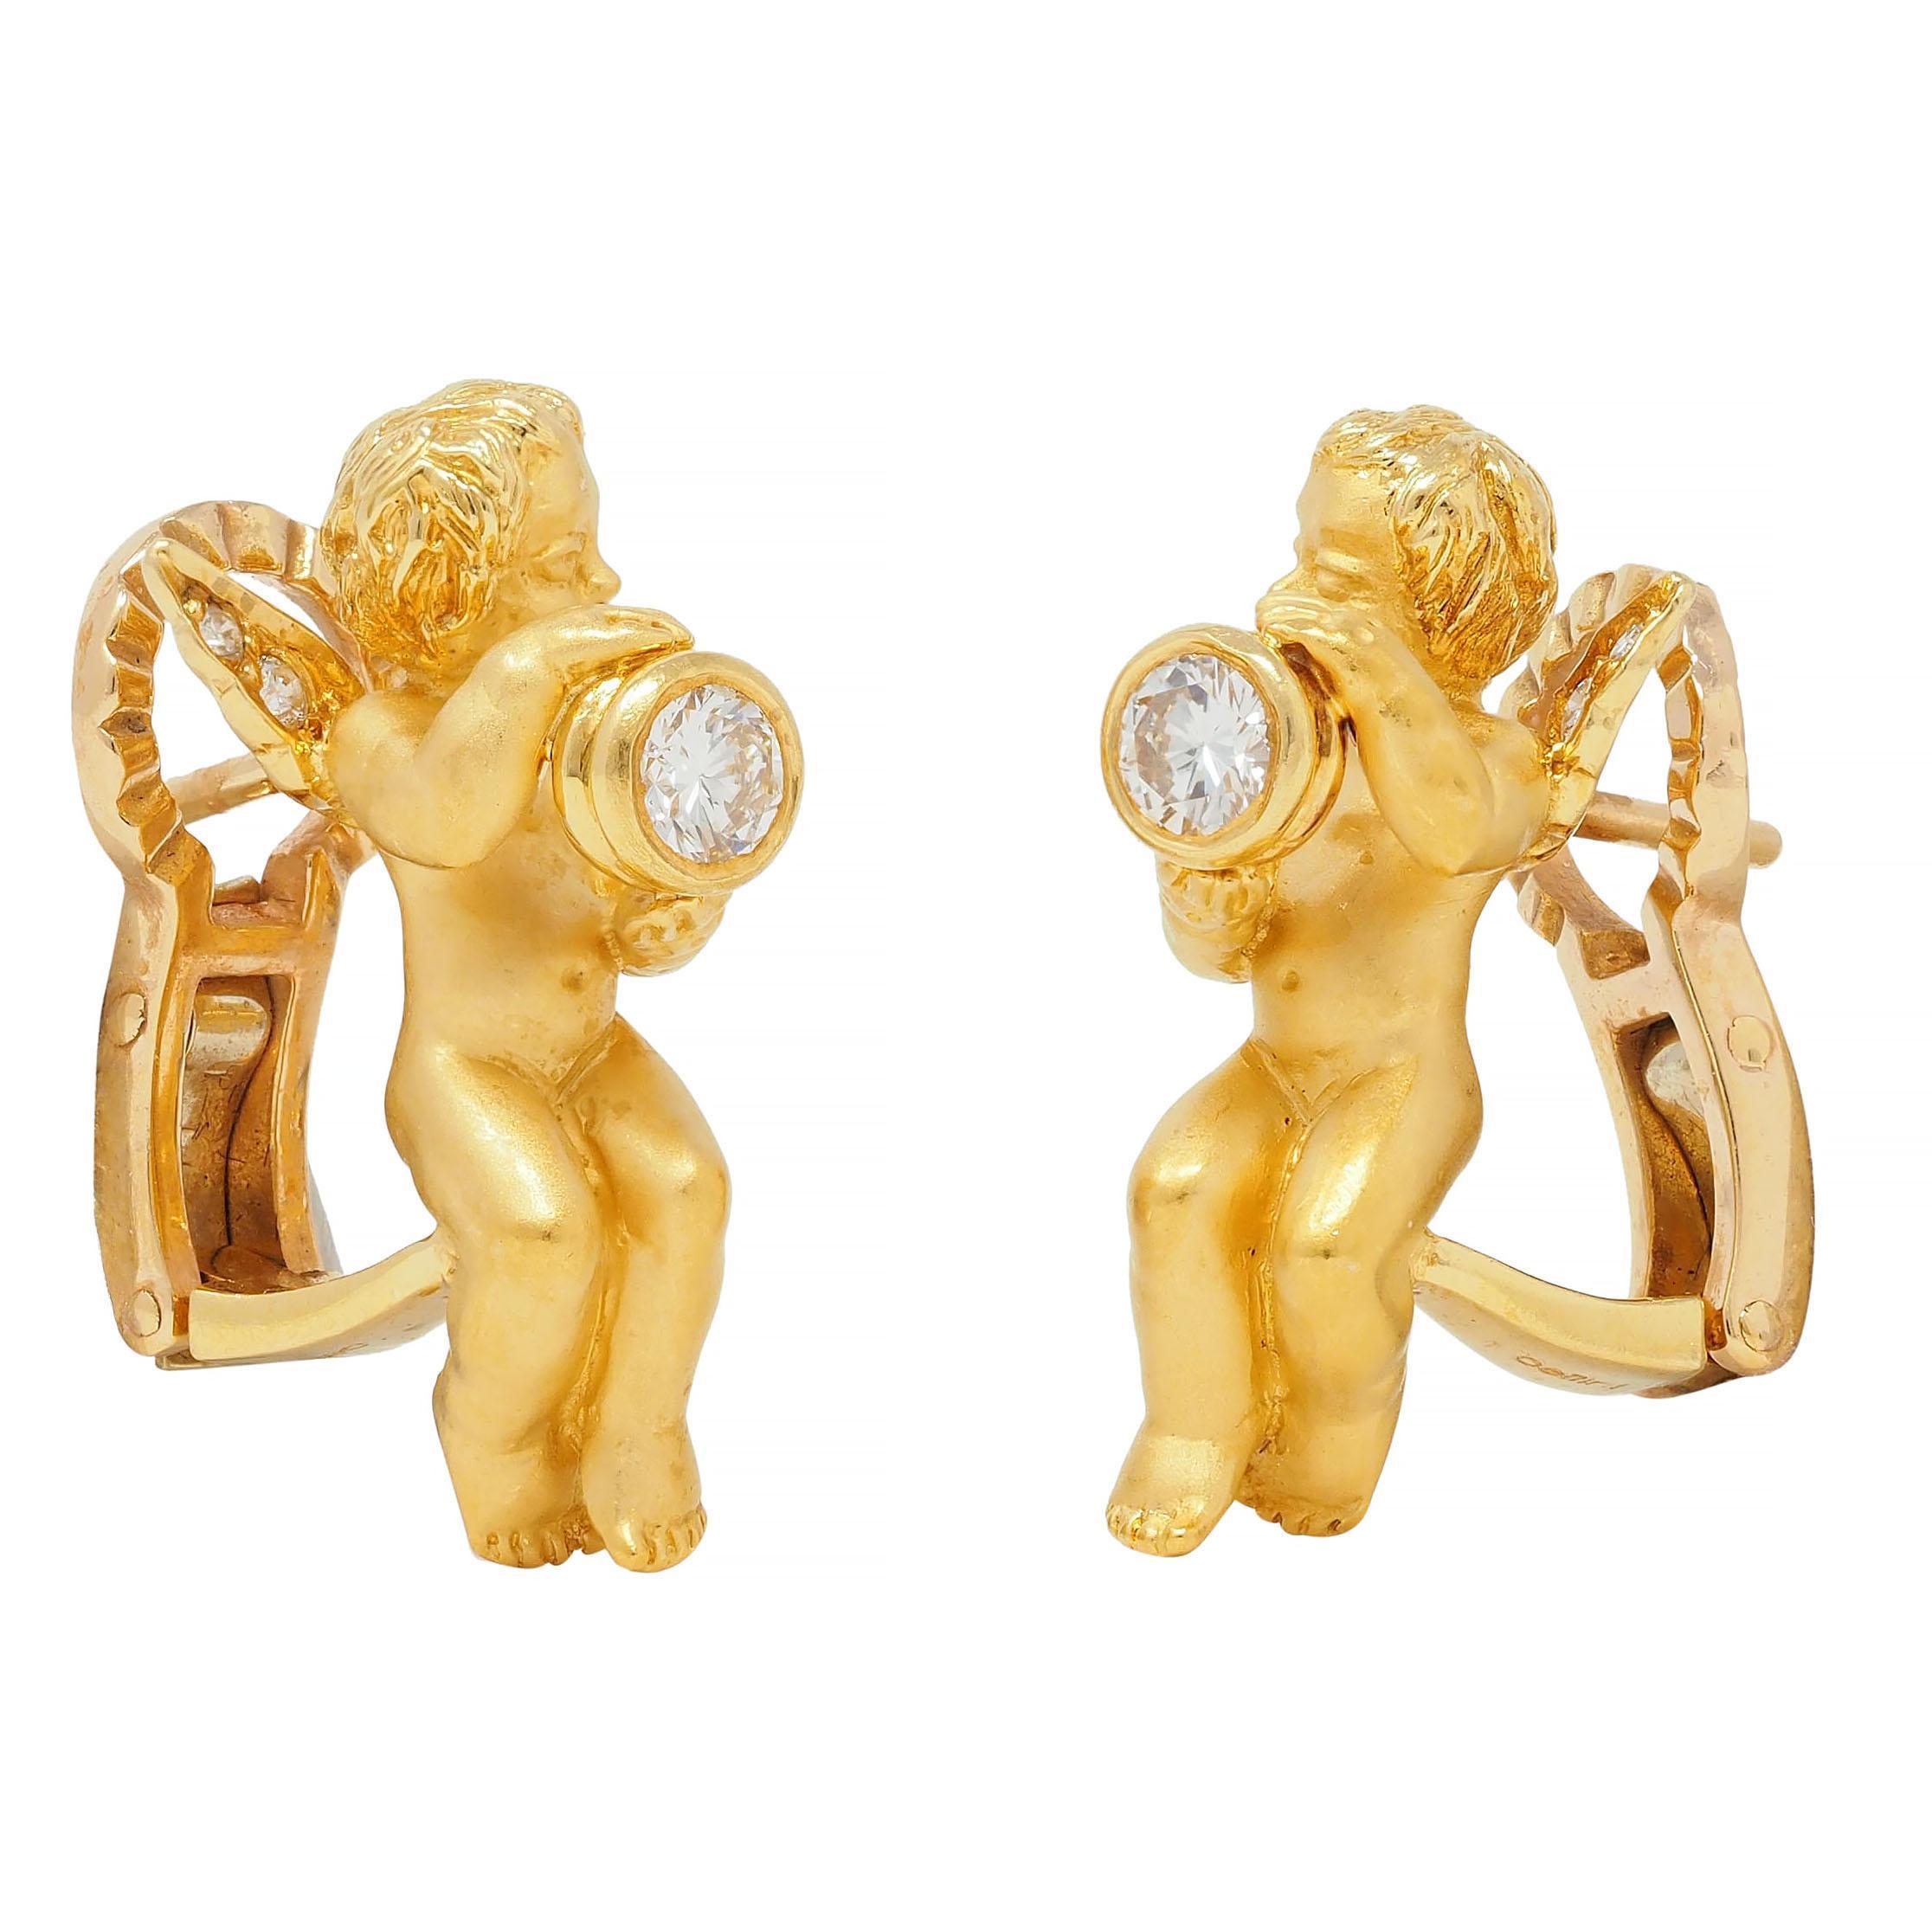 Designed as highly rendered winged cherubs with matte bodies and high polished textured hair
Depicted holding bezel set round brilliant cut diamonds 
With additional diamonds bead set in wings
Weighing approximately 0.38 carat total - G color with